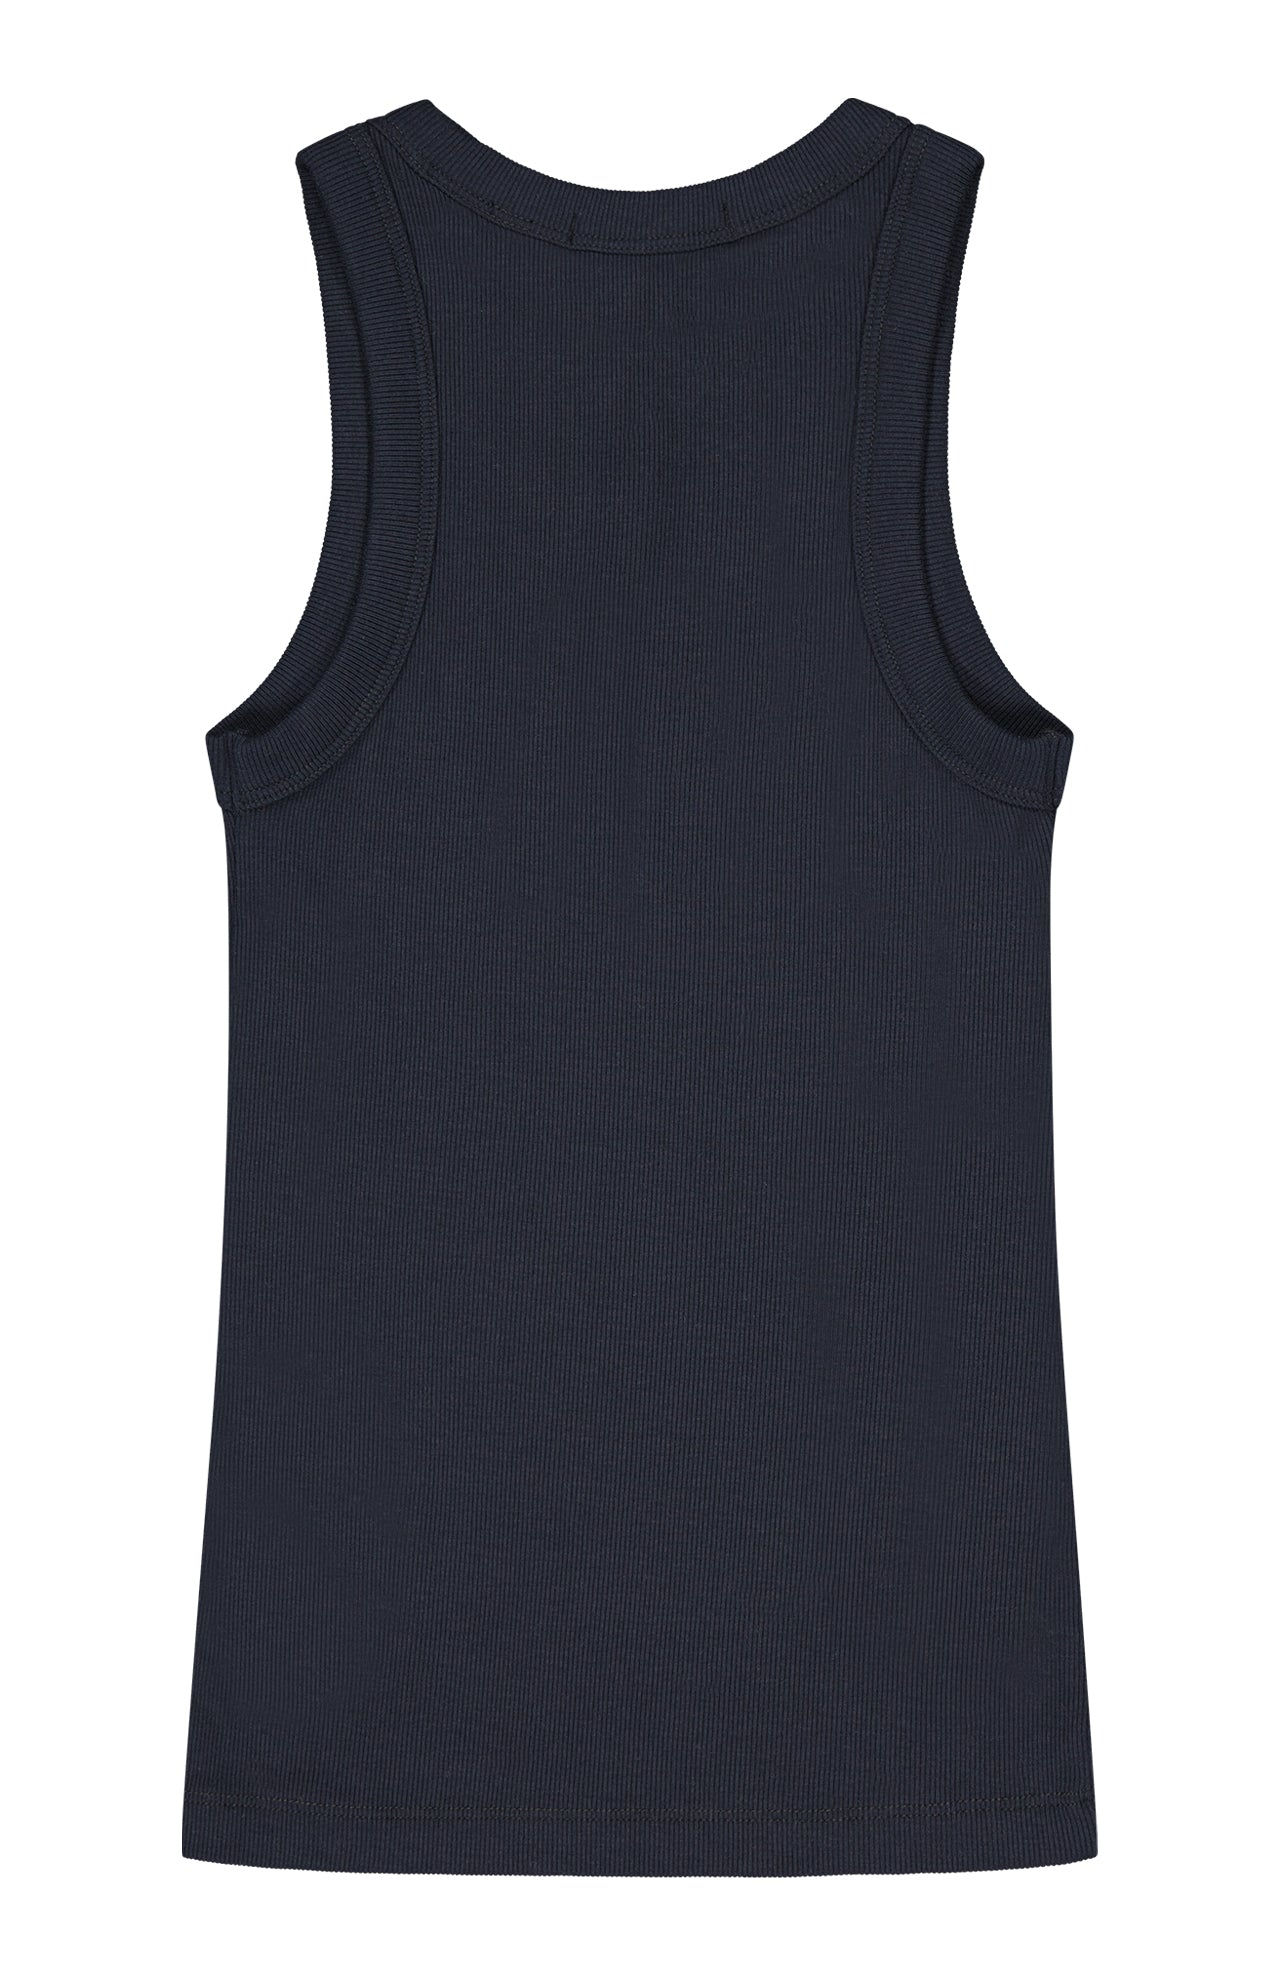 Orion Tank Top (7256212602995)